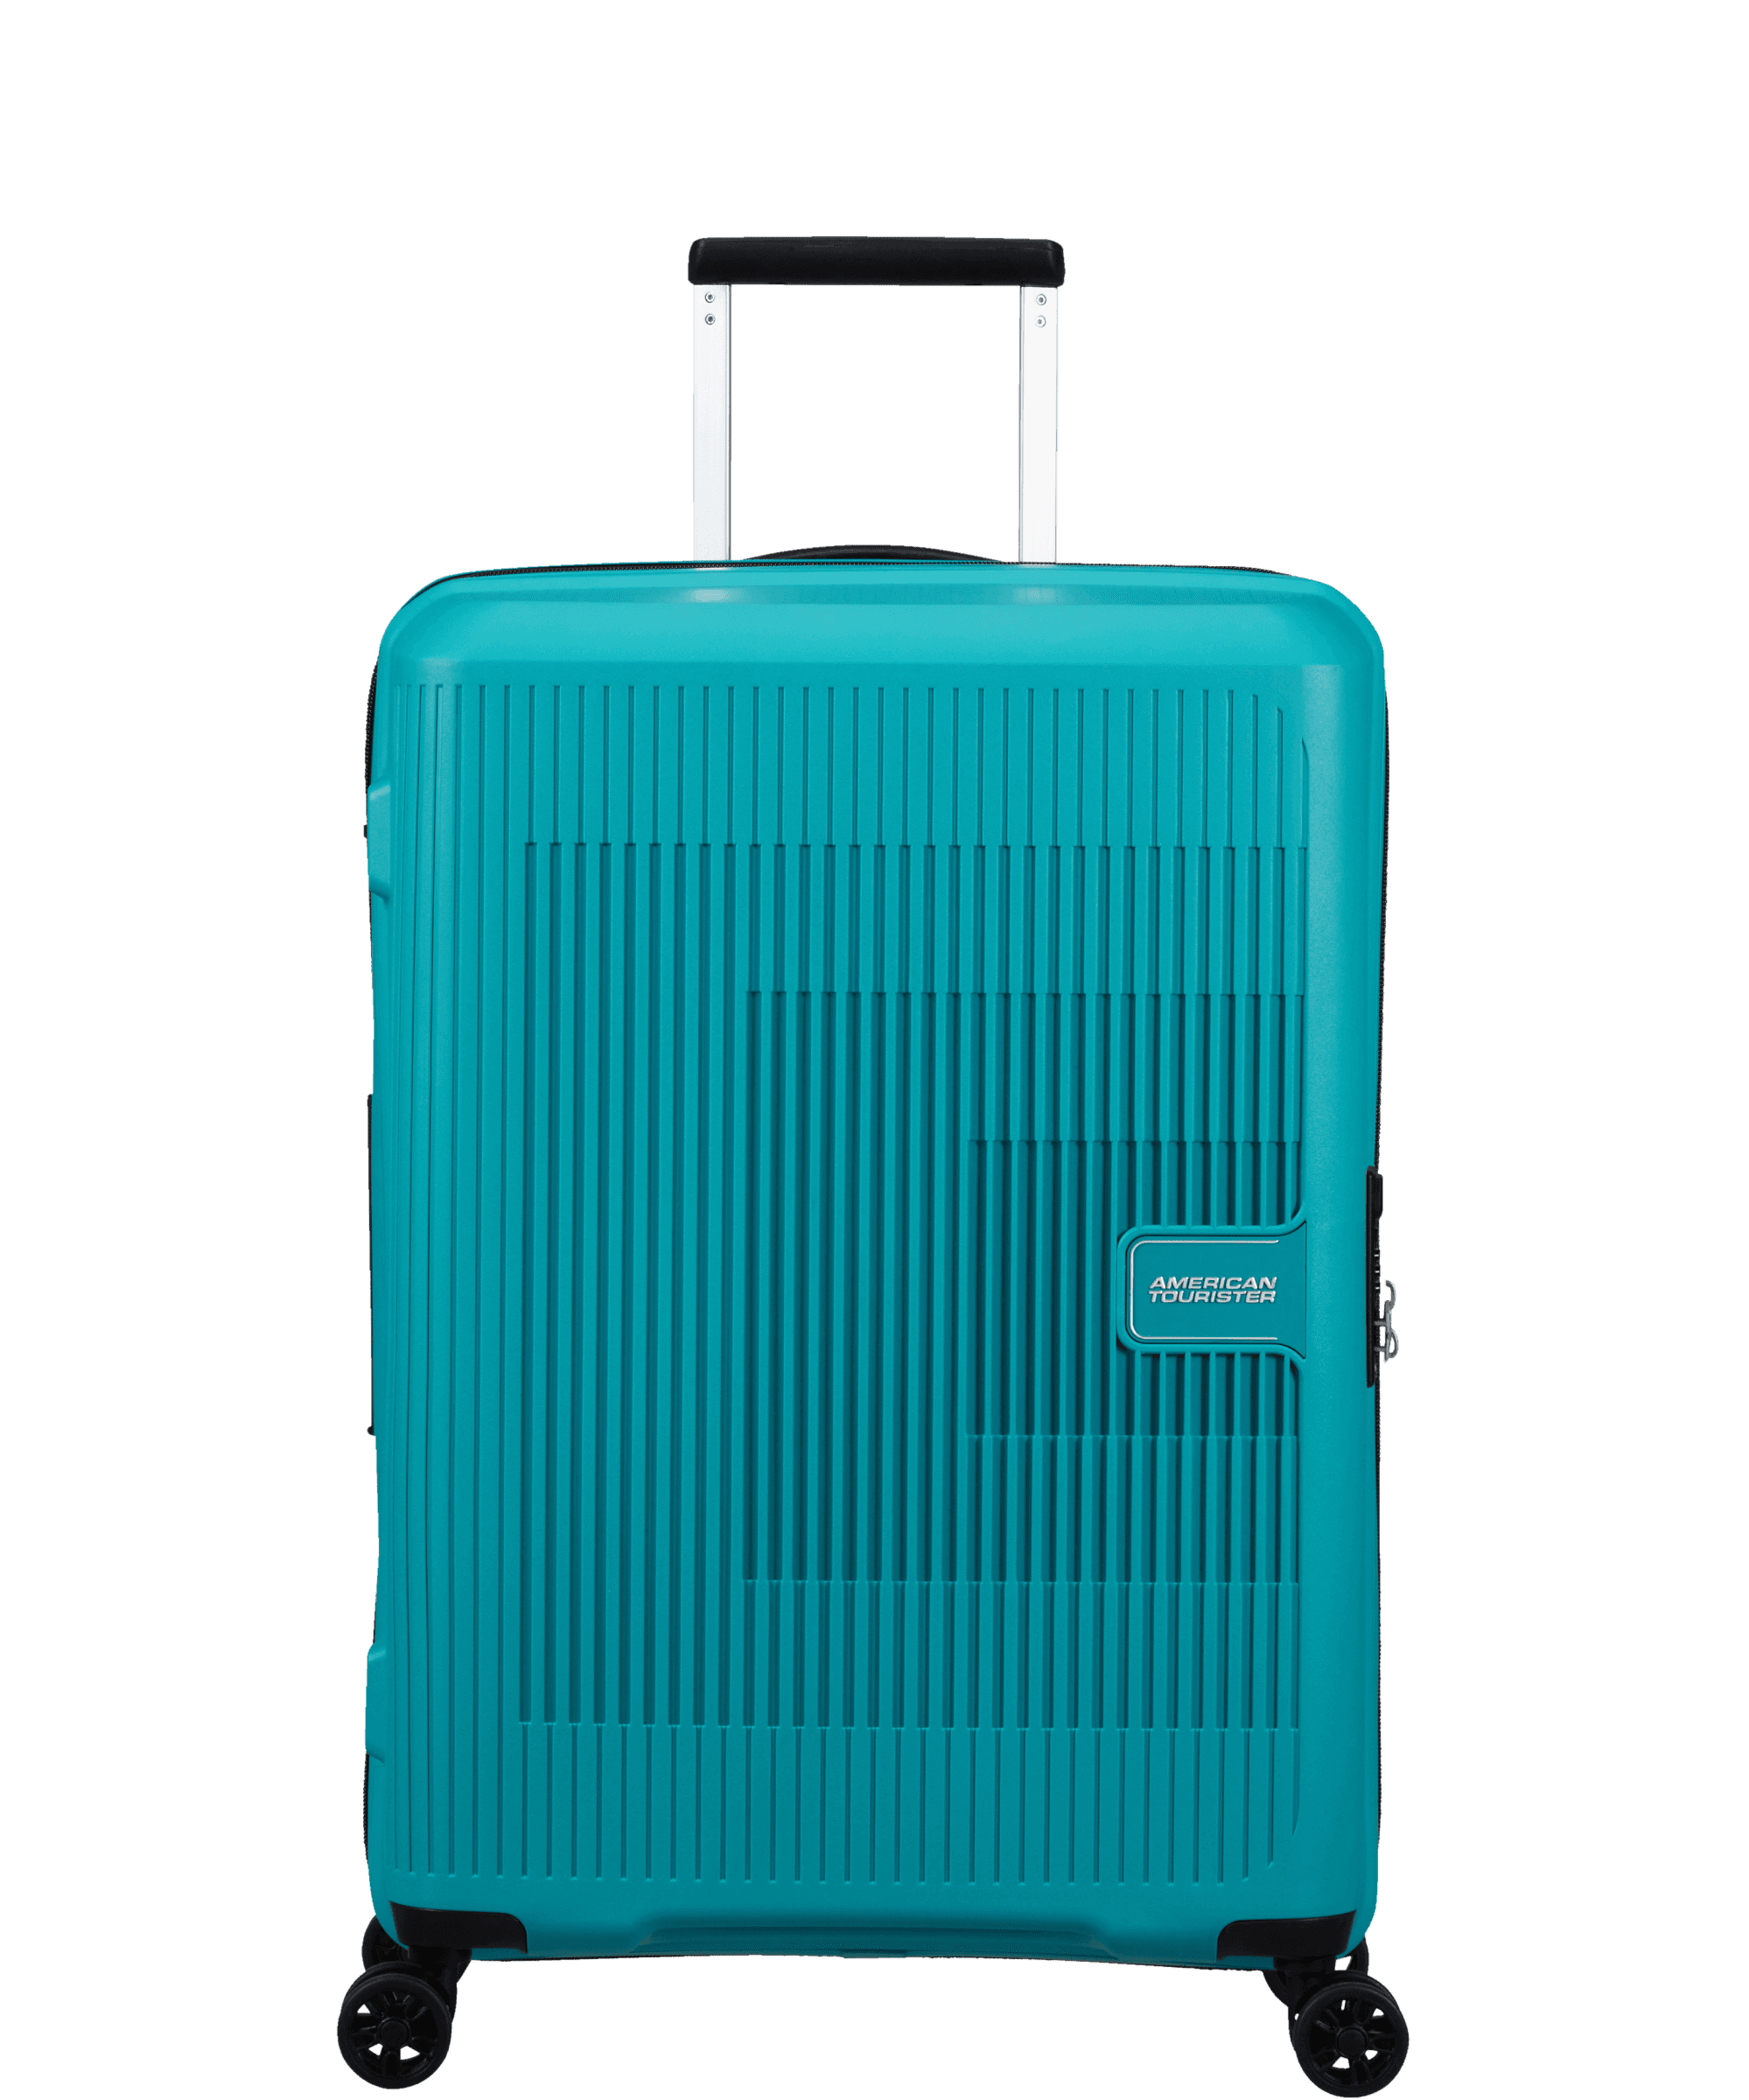 Top 5 Best American Tourister Trolley Bag In India 2023 | American  Tourister Bag Under 3000 - YouTube